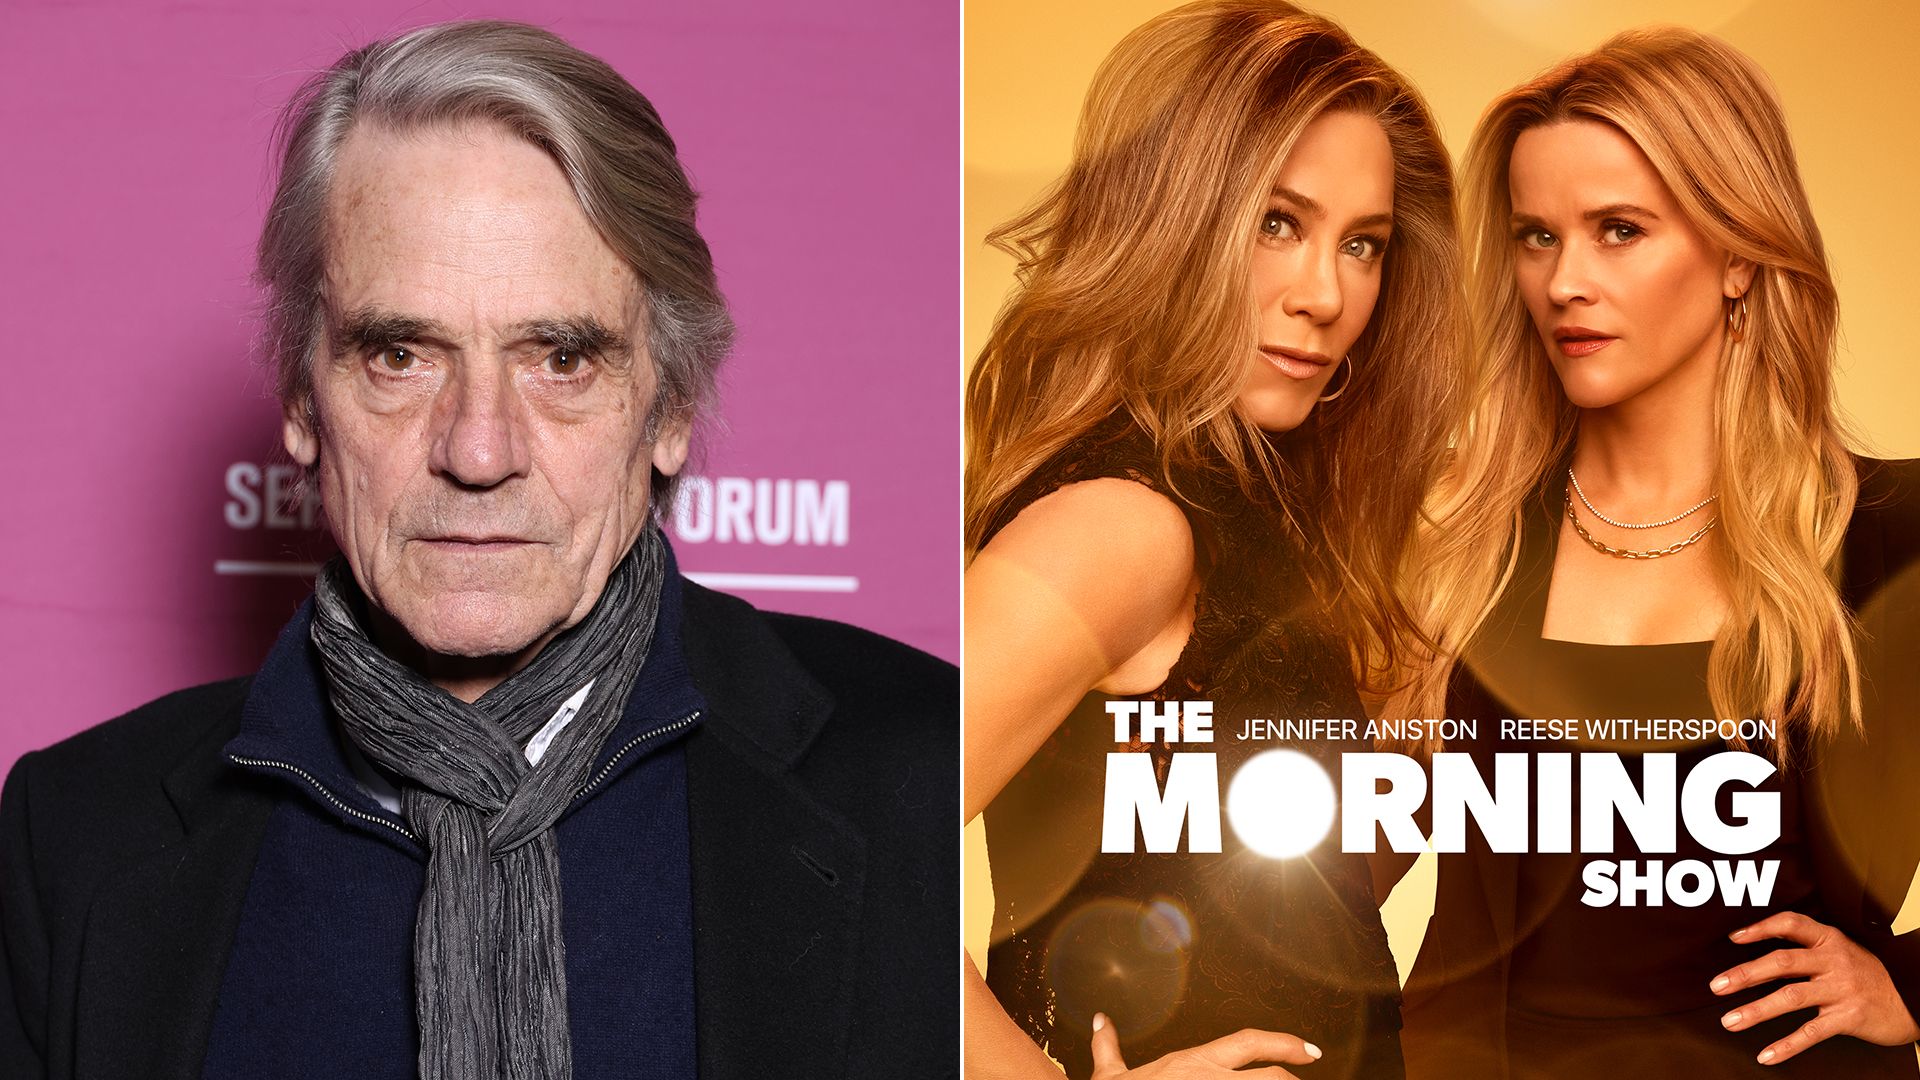 Split image of Jeremy Irons and The Morning Show poster